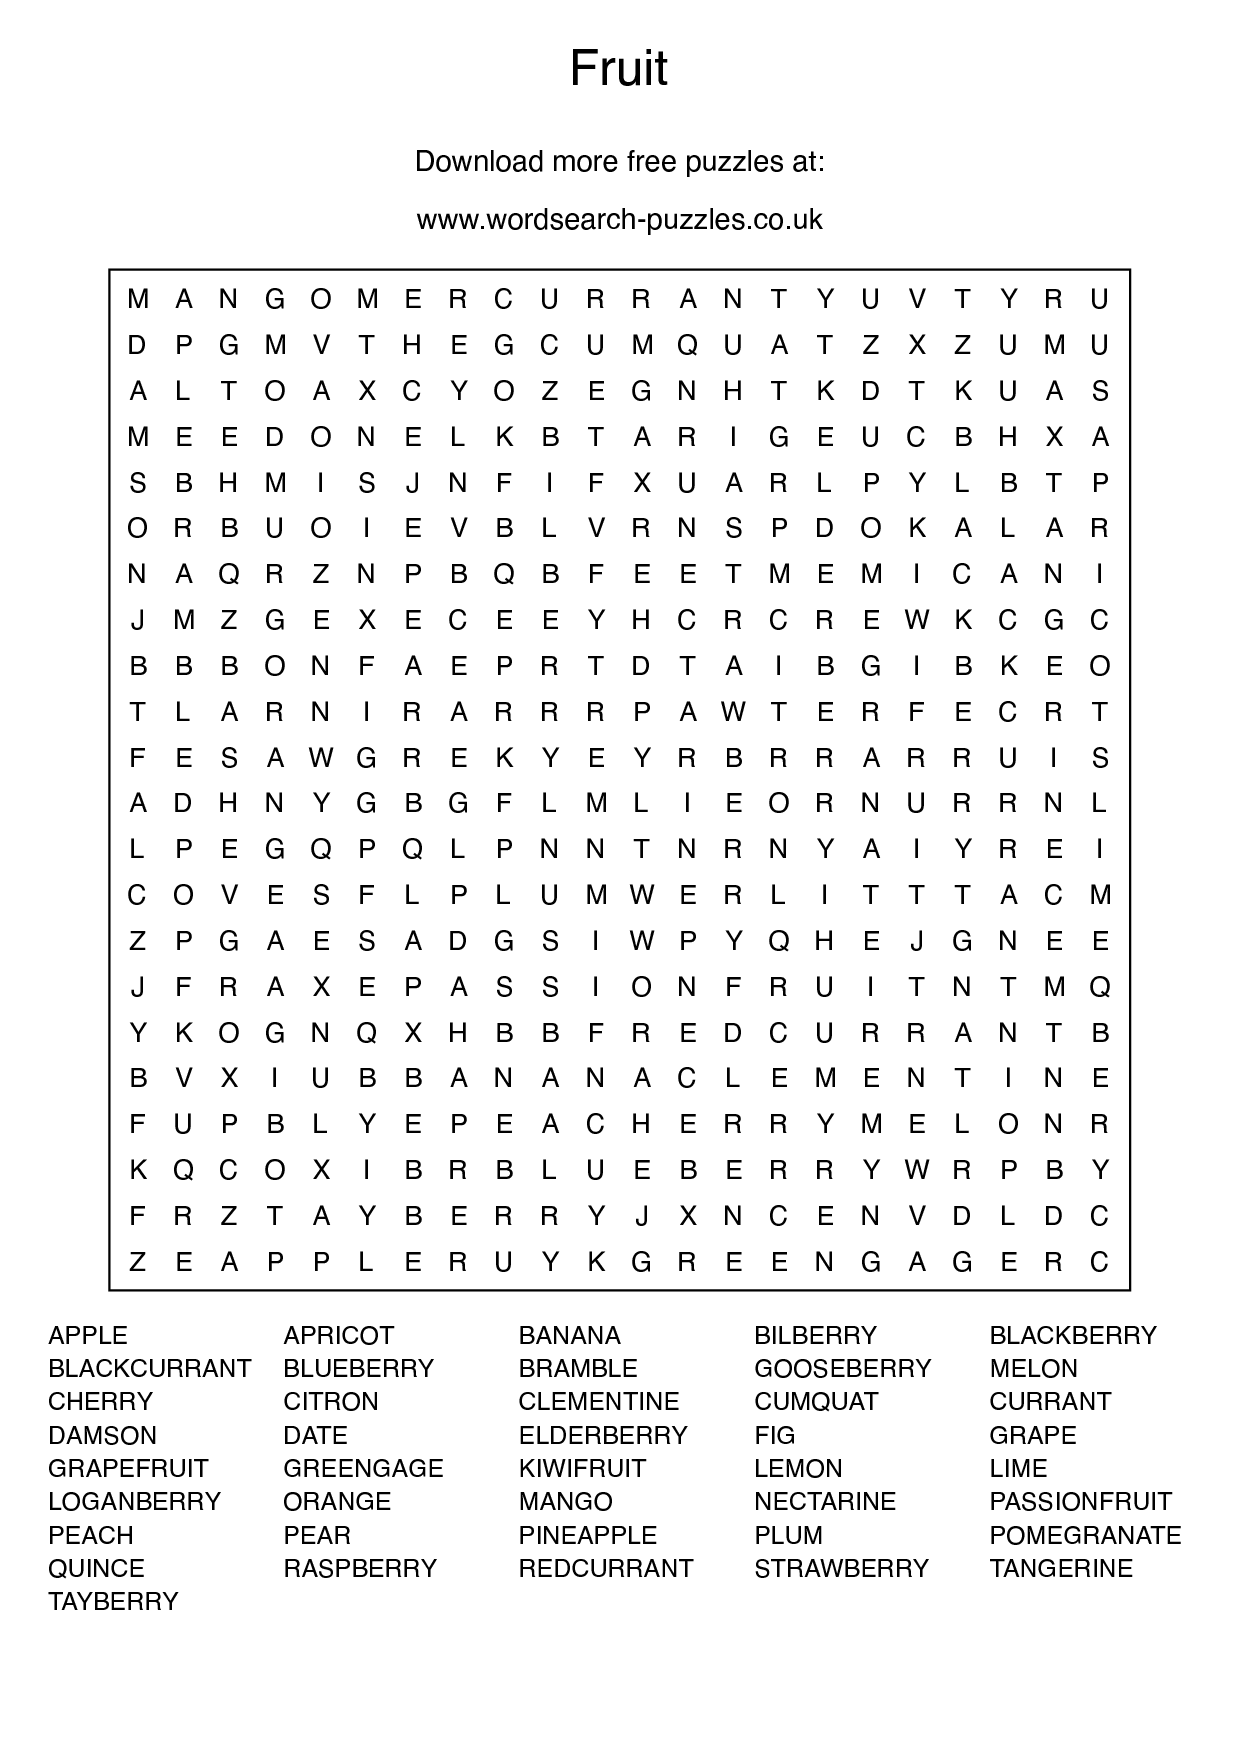 Large Hard Biblical Word Searches Online AOL Image Search Results 